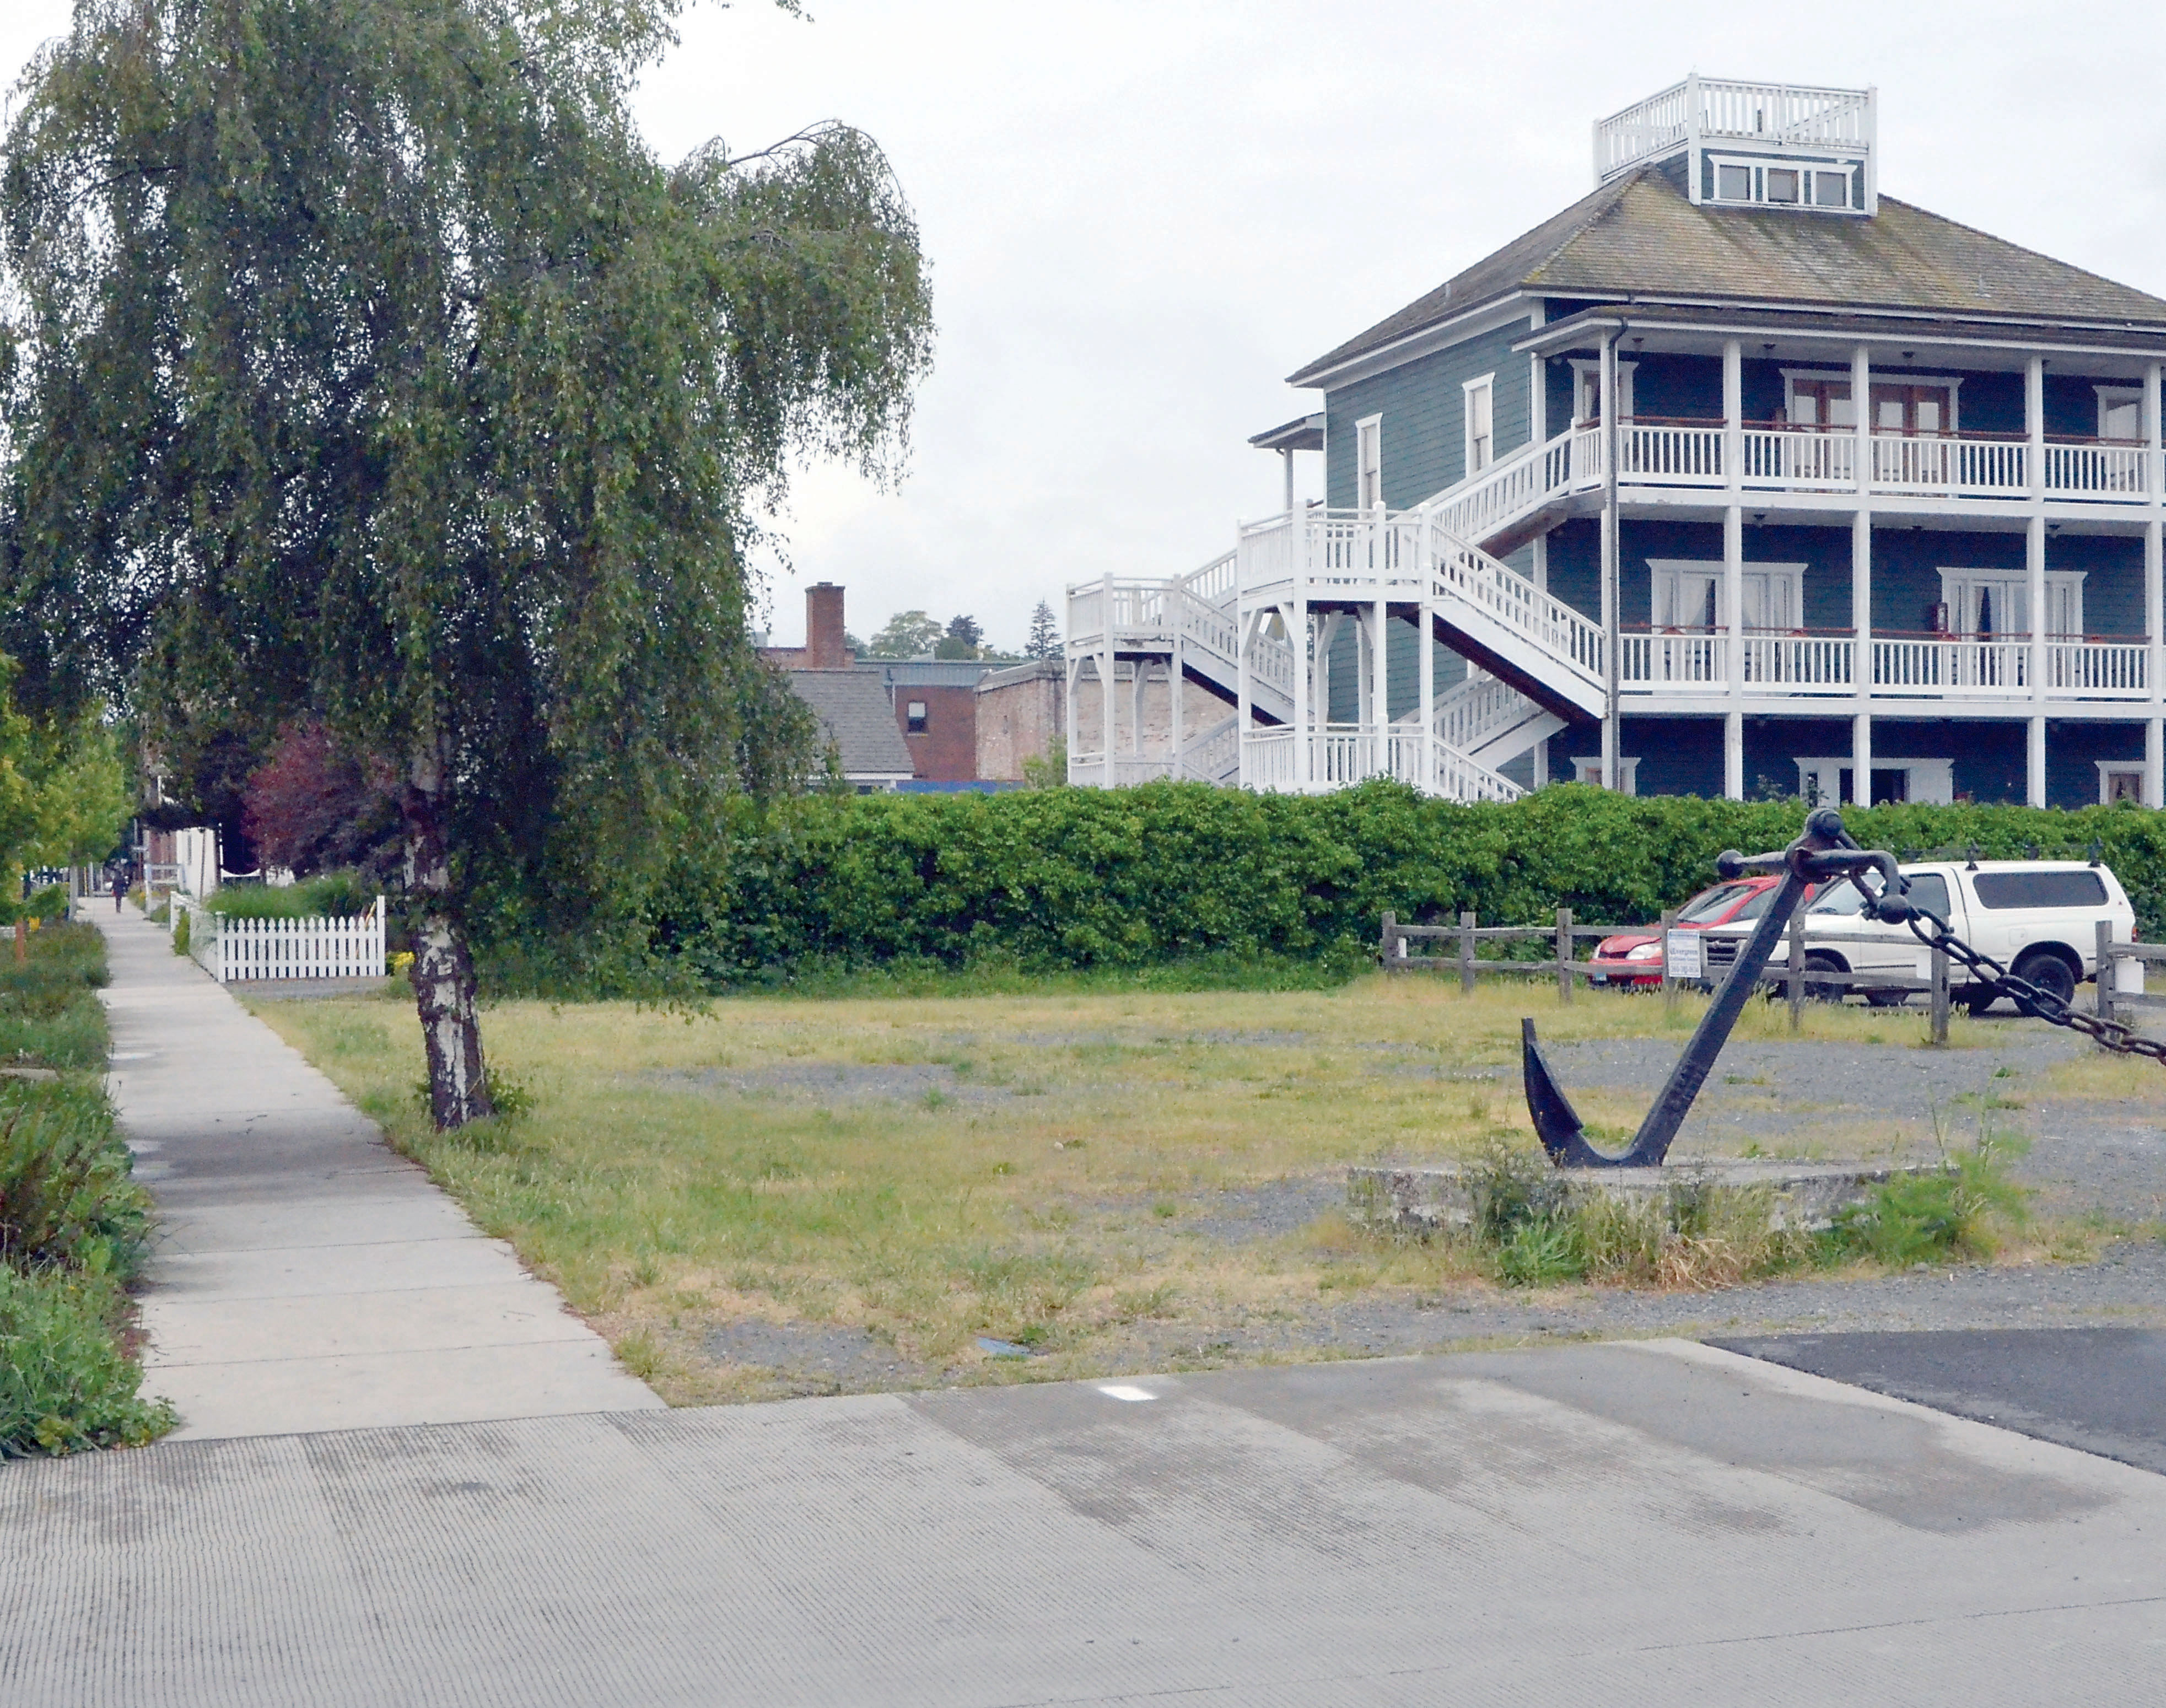 The site of the former Landfall Restaurant in Port Townsend